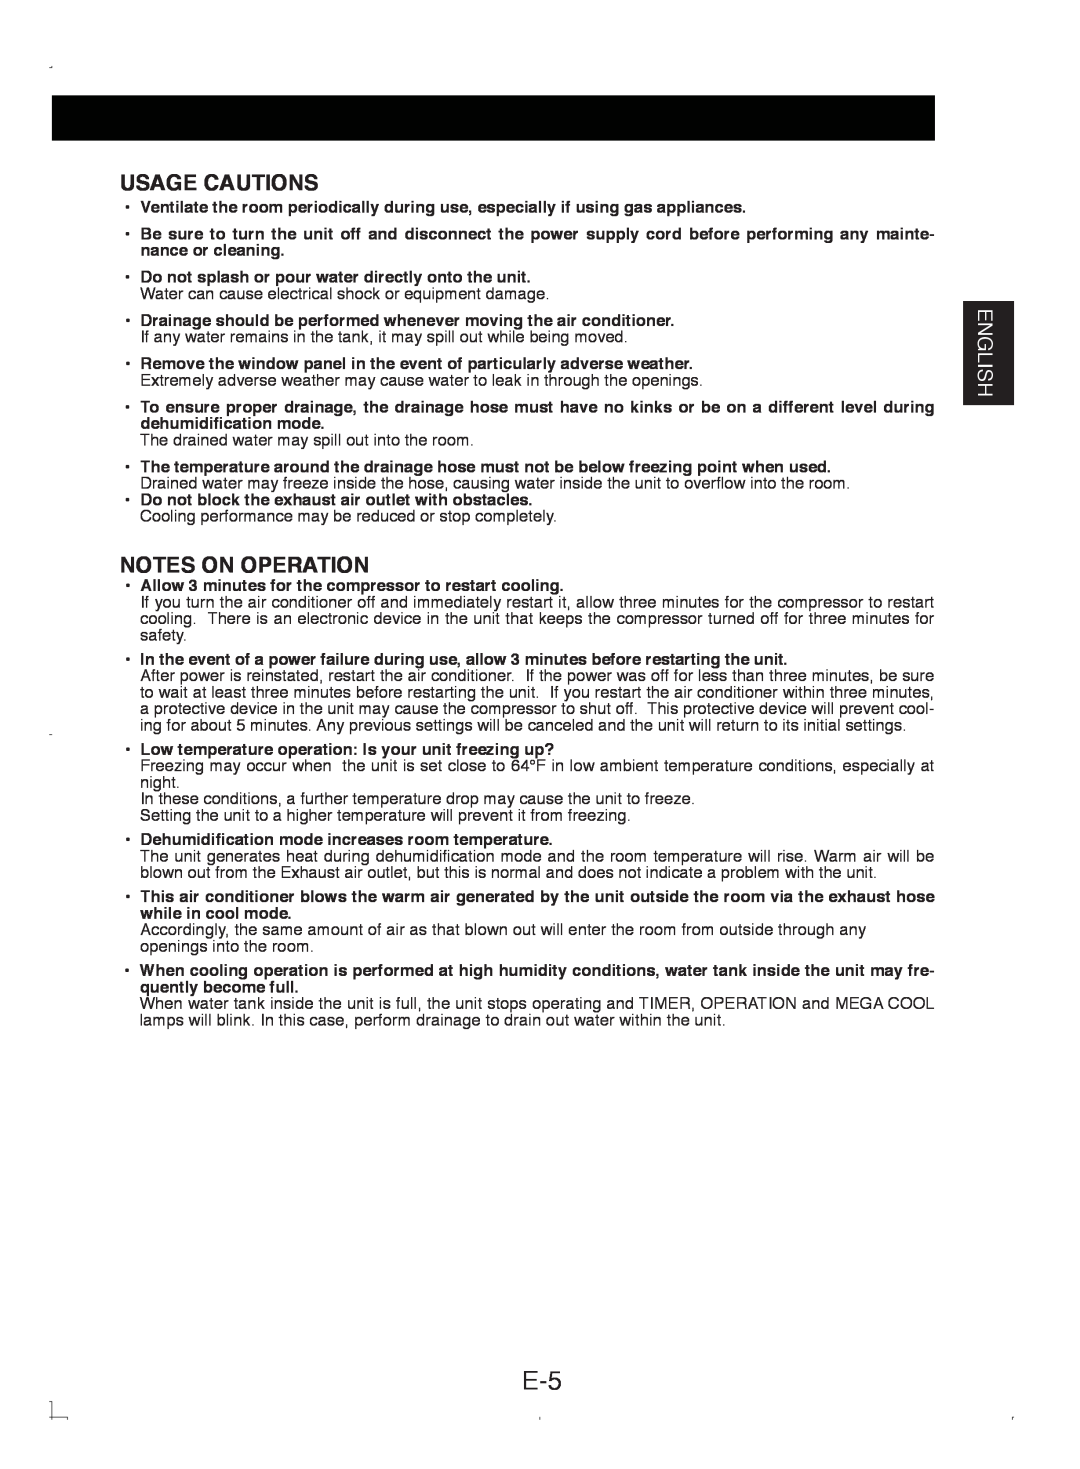 Sony CV-P12PX operation manual Usage Cautions, Notes On Operation, English 